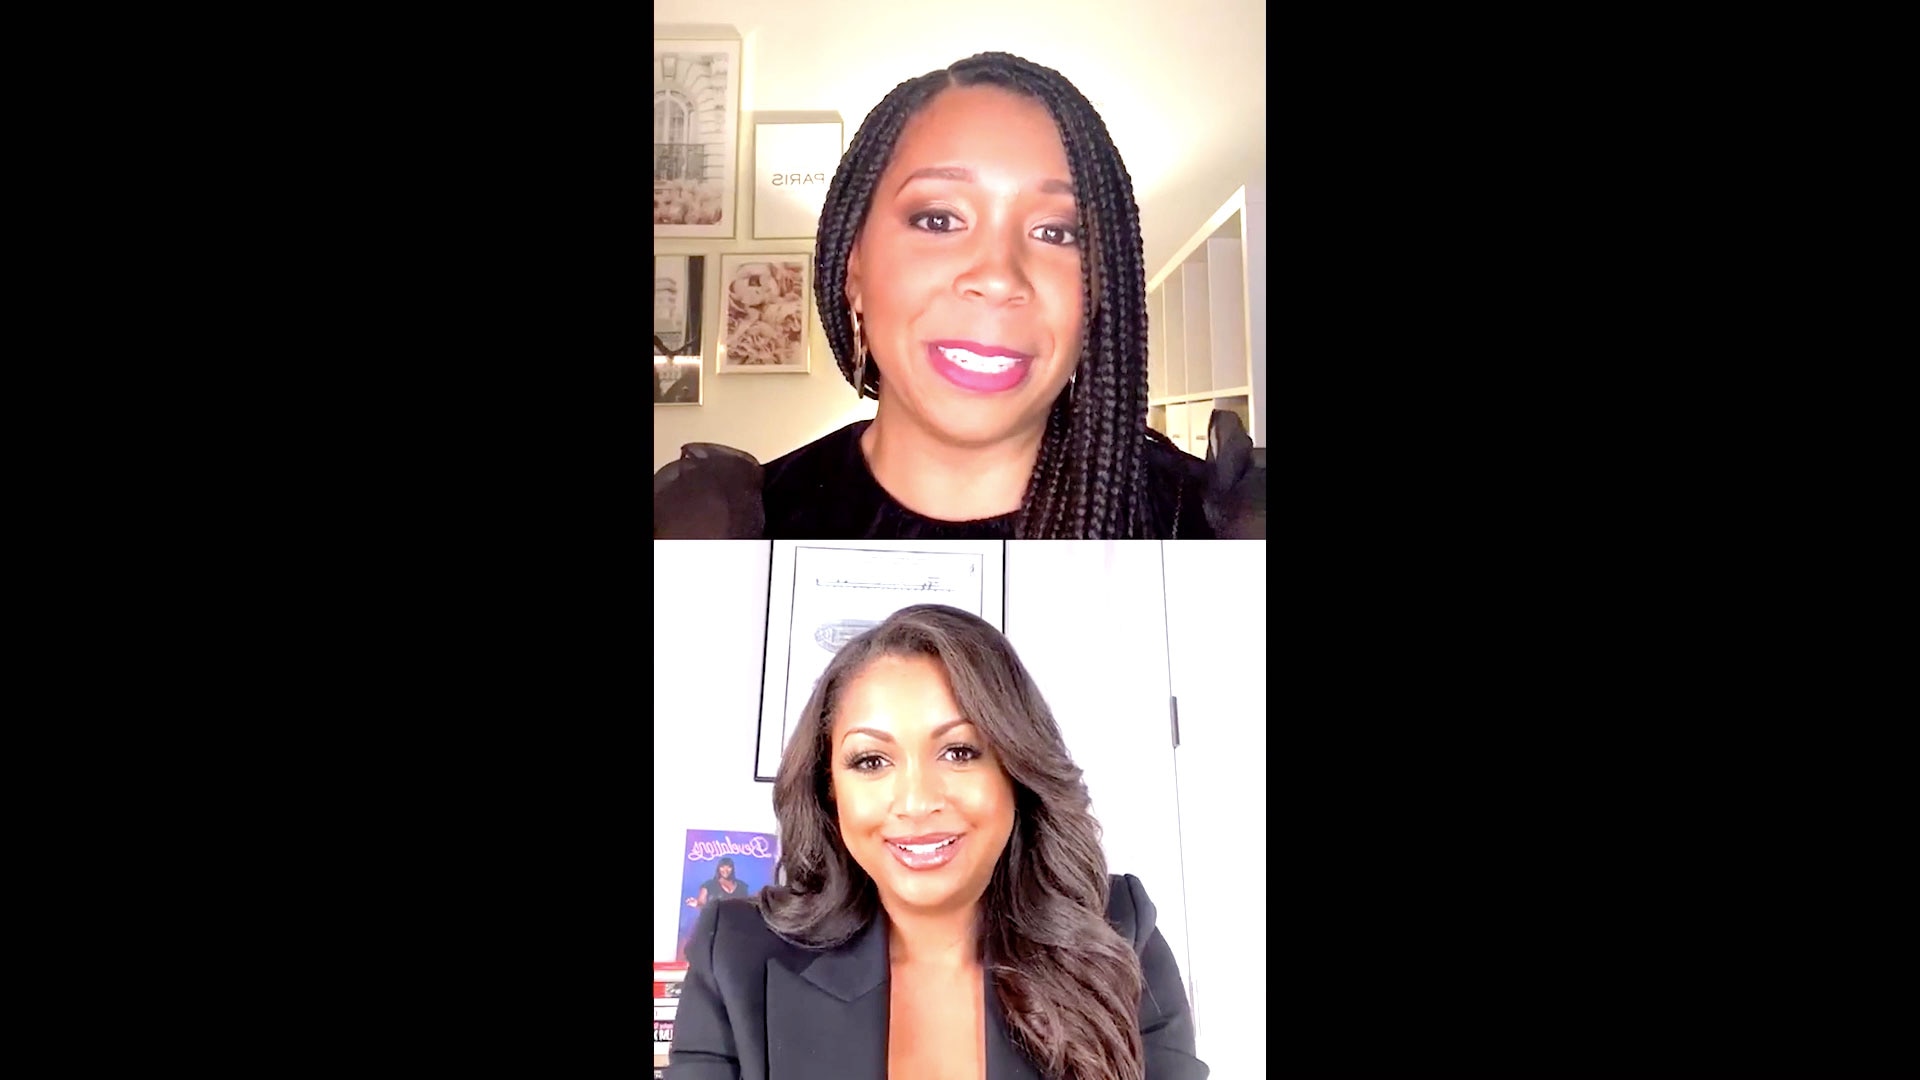 What Does Being a Black Woman Mean to Eboni K. Williams?